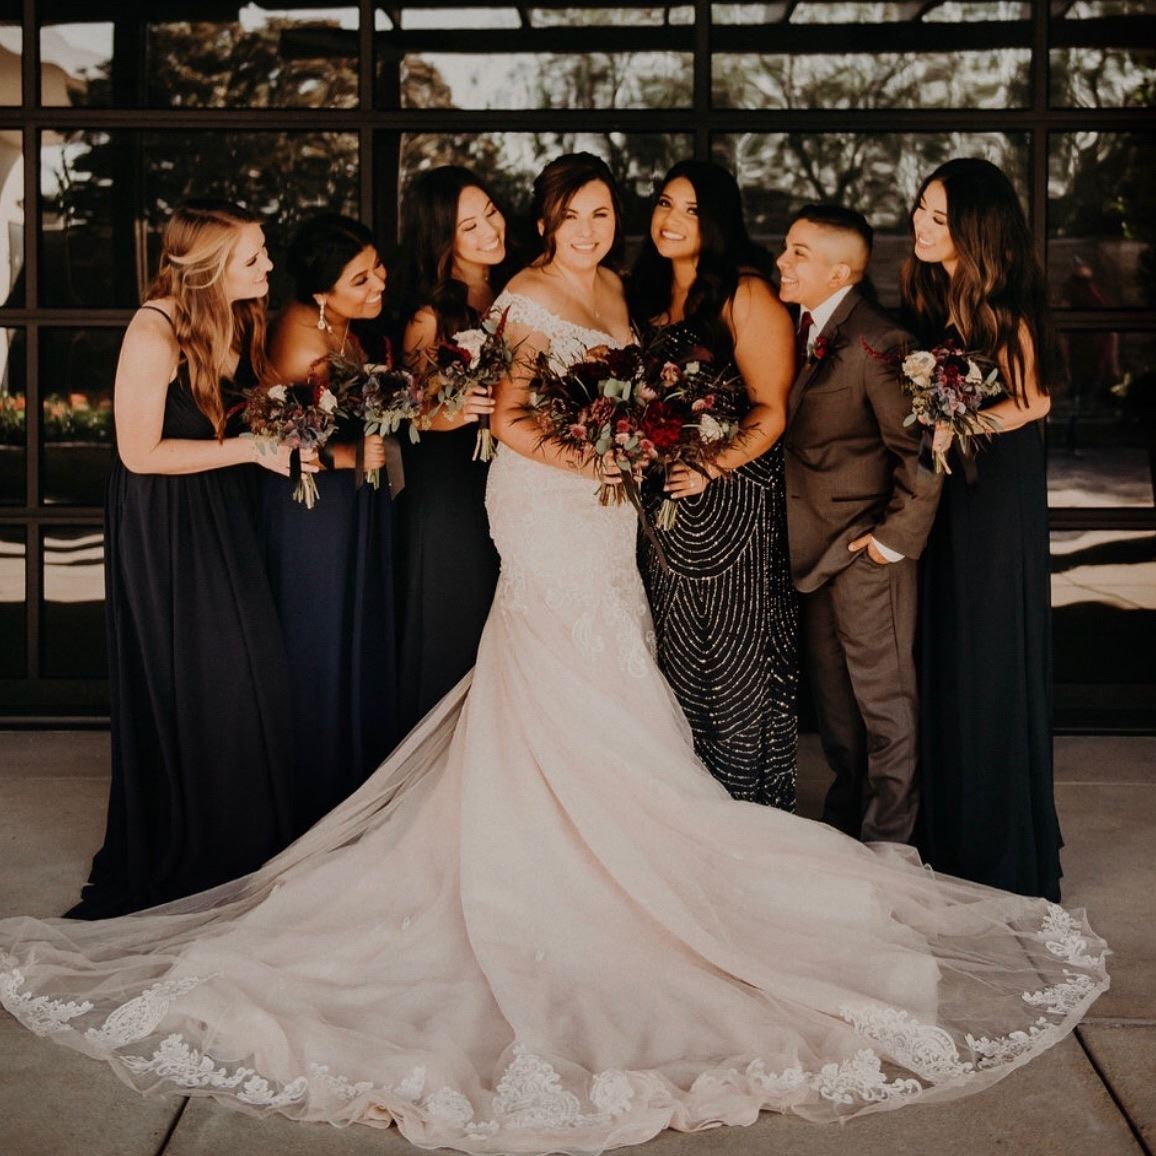 Bride in white wedding dress with flowers surrounded bridesmaids